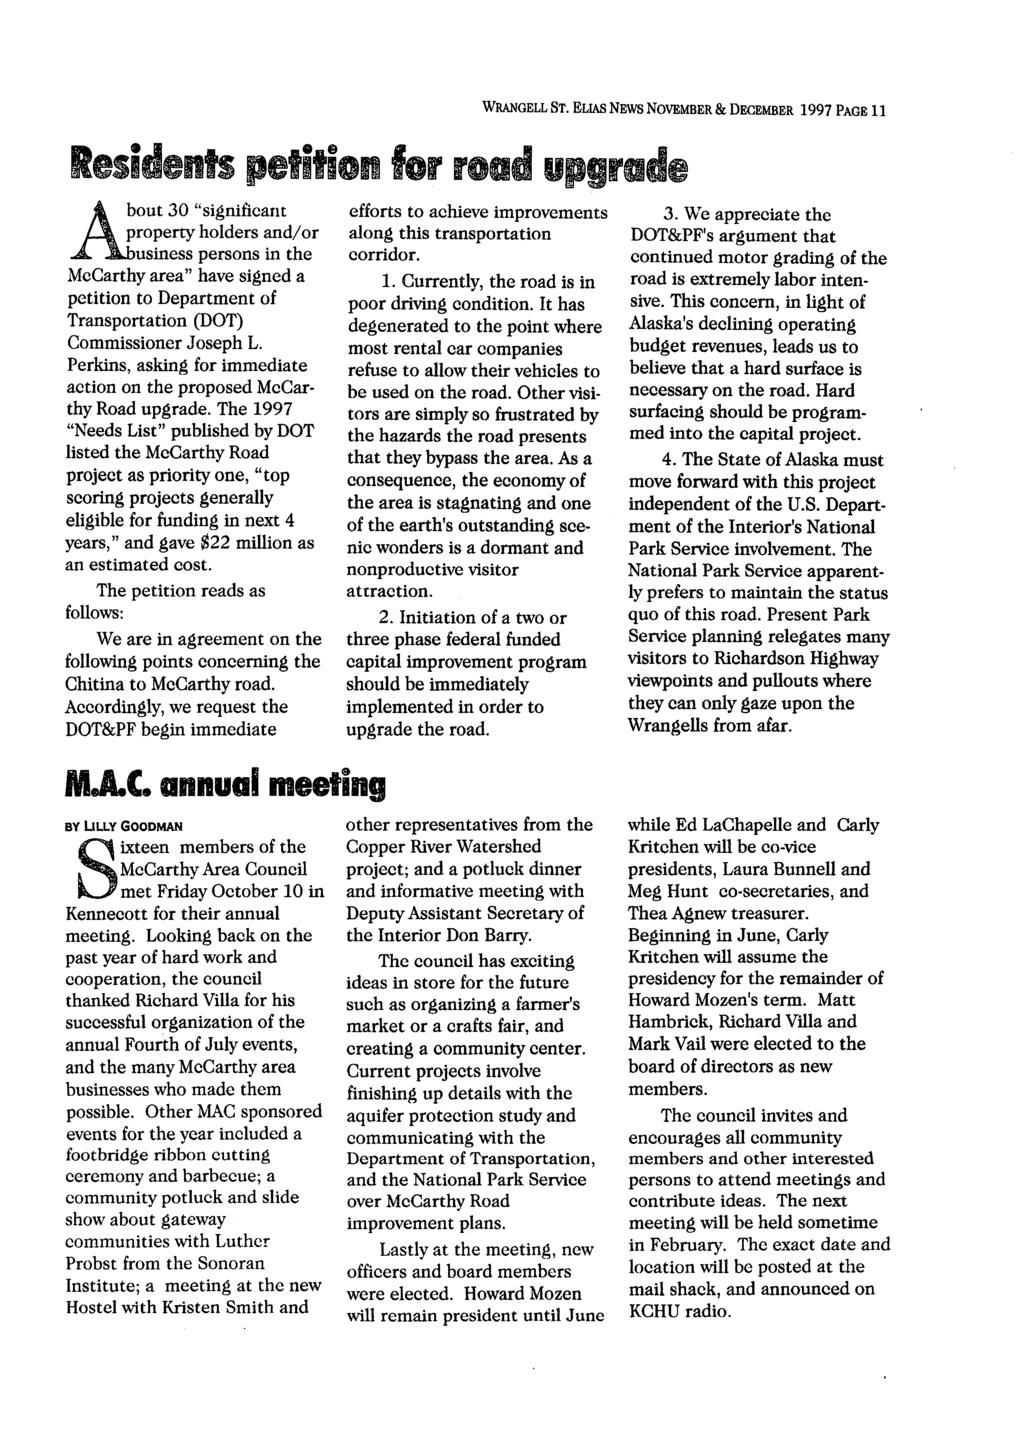 WRANGELL ST. ELIAS NEWS NOVEMBER & DECEMBER 1997 PAGE 11 Residents petition for road upgrade.